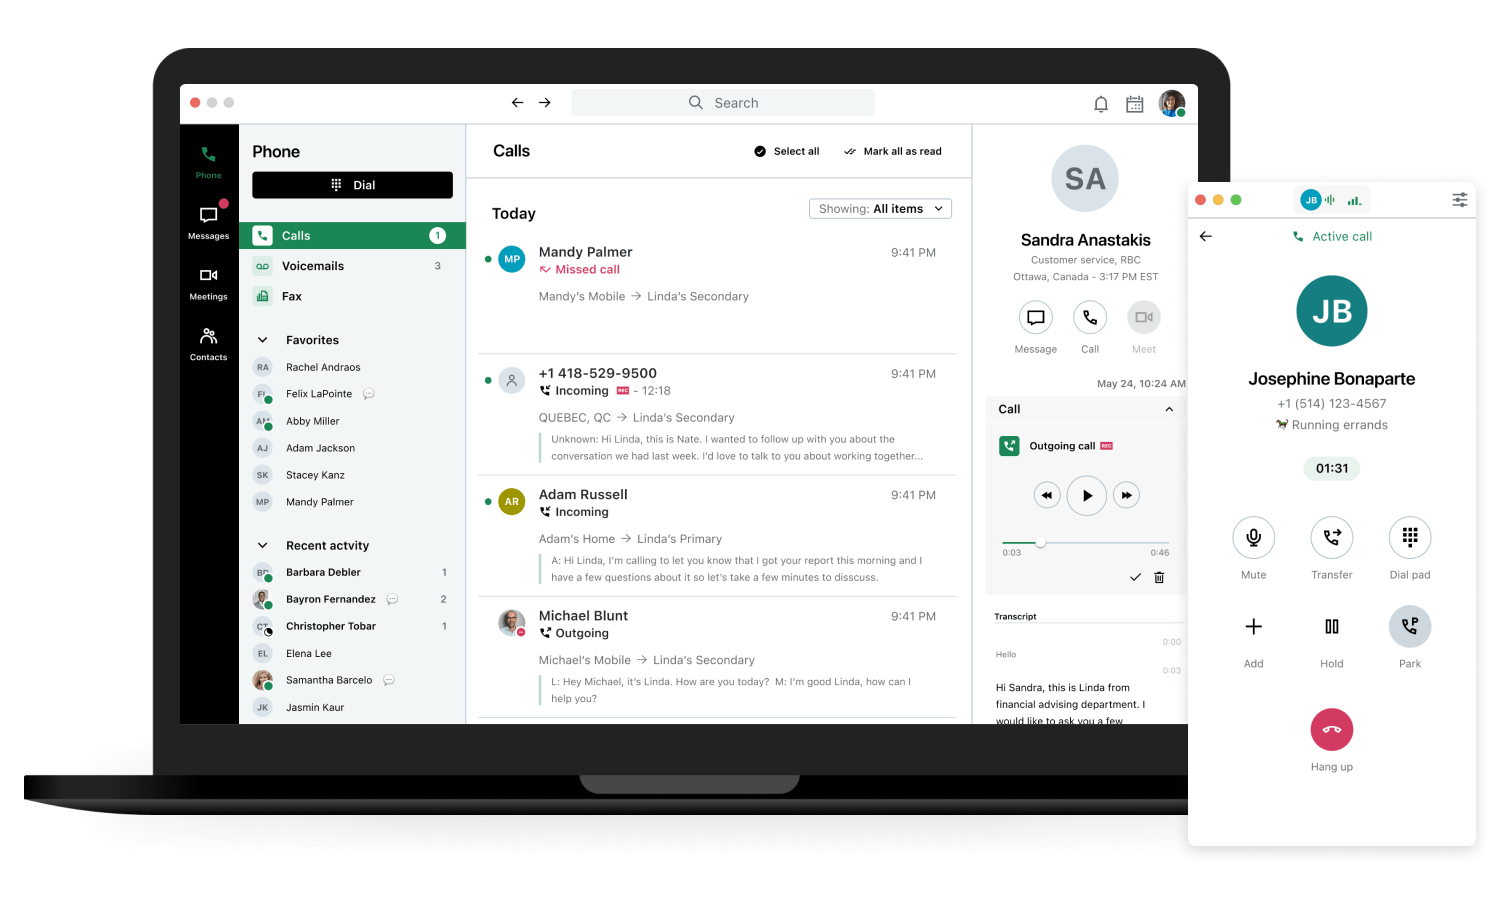 GoTo Connect's robust interface has everything you need in one place.